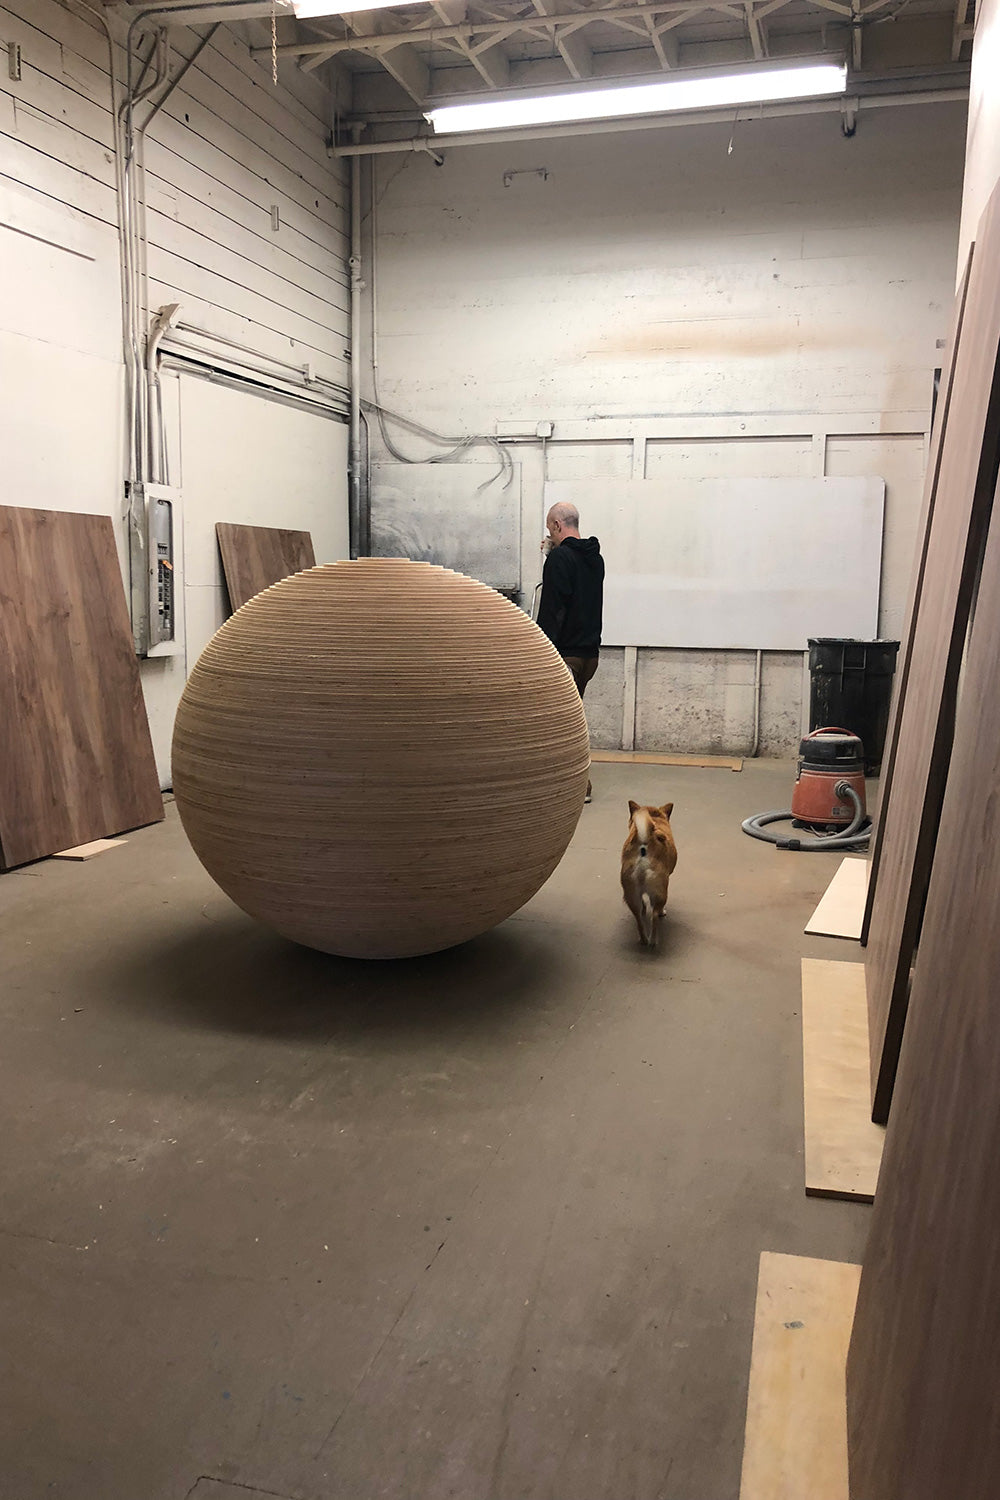 Picture of stacked lamination ball shown in studio next to dog for scale